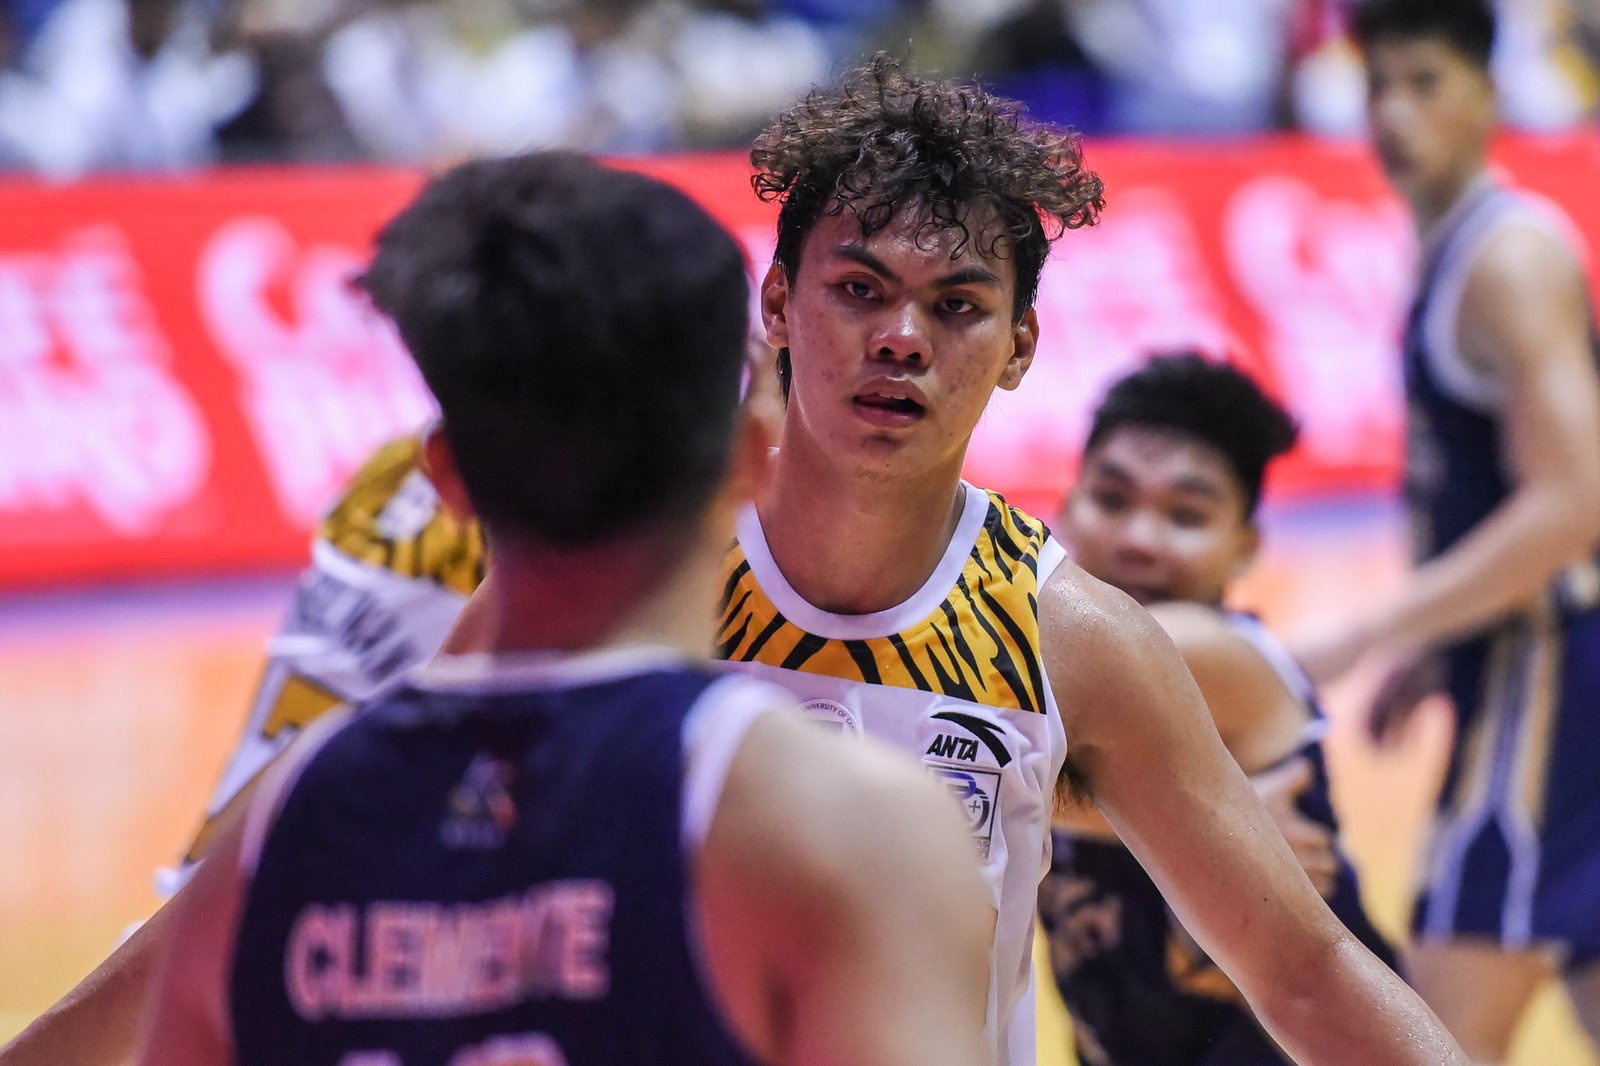 Nic Cabanero of the UST Growling Tigers [UAAP photo]